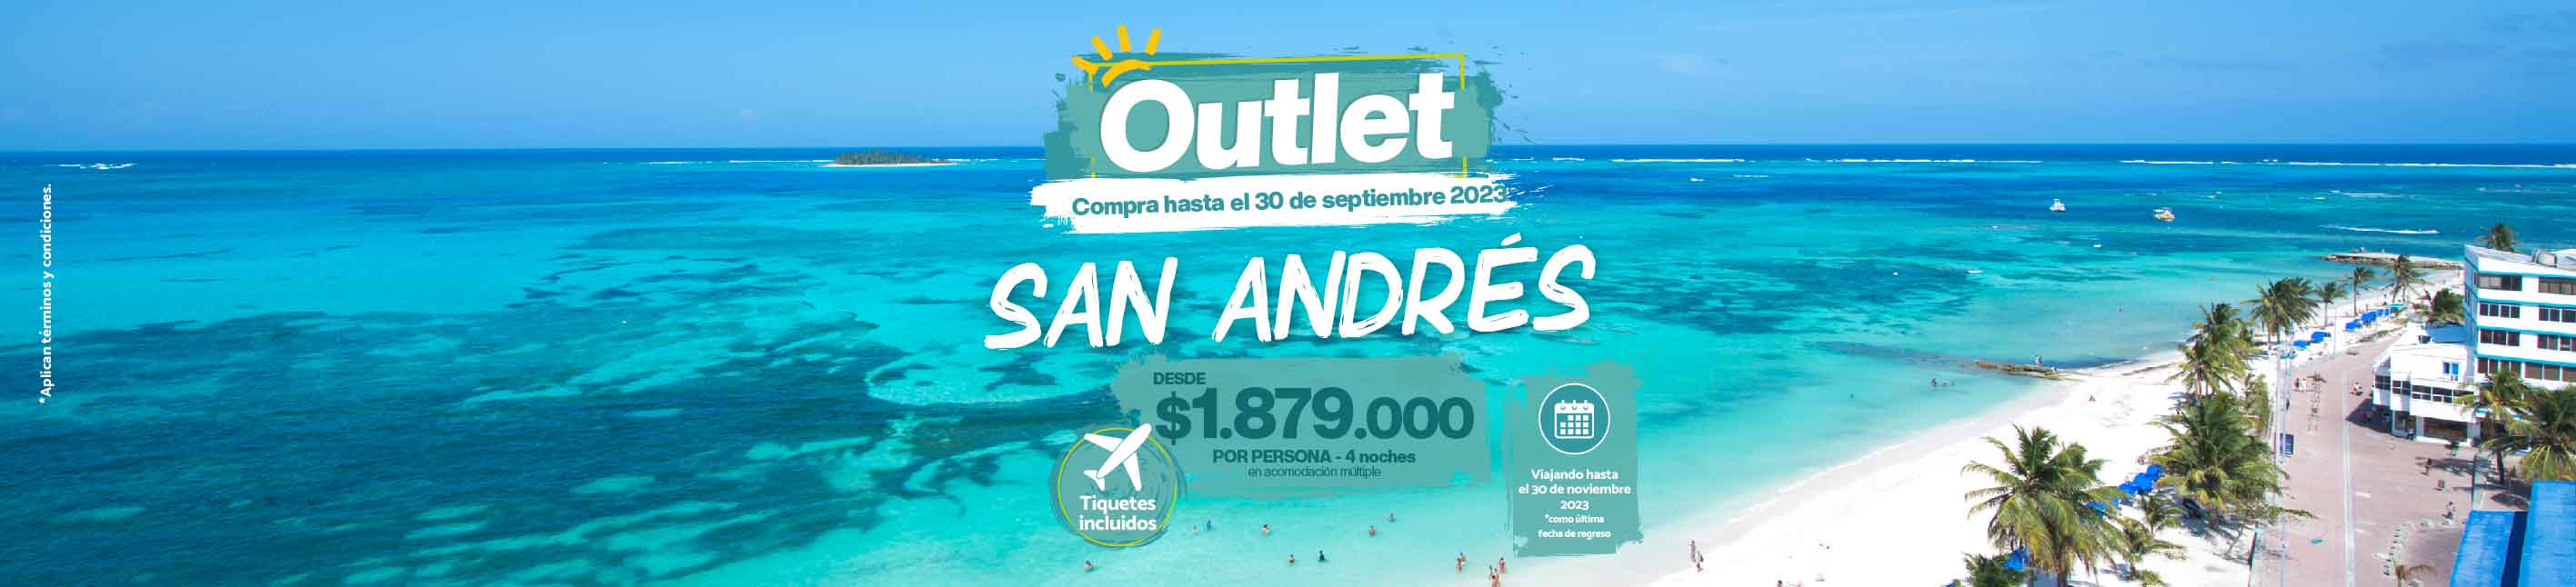 San_Andres